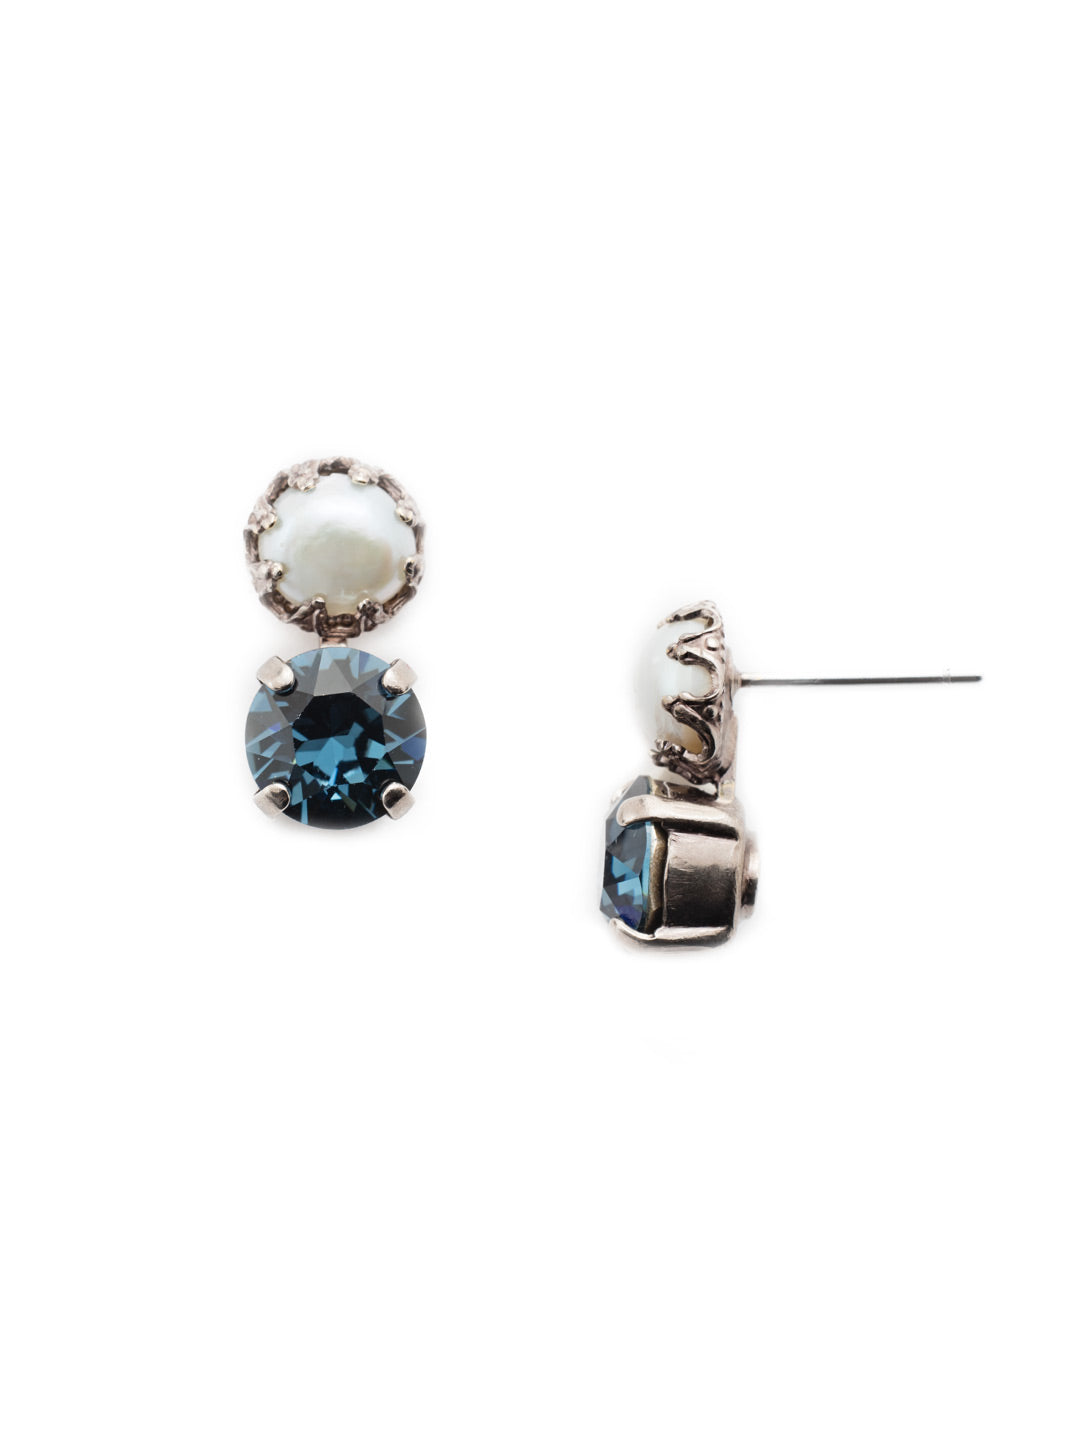 Dallas Stud Earrings - EEU14ASNFT - Our Dallas Stud Earrings are classics you'll pass down through the ages. A beautiful freshwater pearl pairs perfectly with a round crystal sparkler. From Sorrelli's Night Frost collection in our Antique Silver-tone finish.